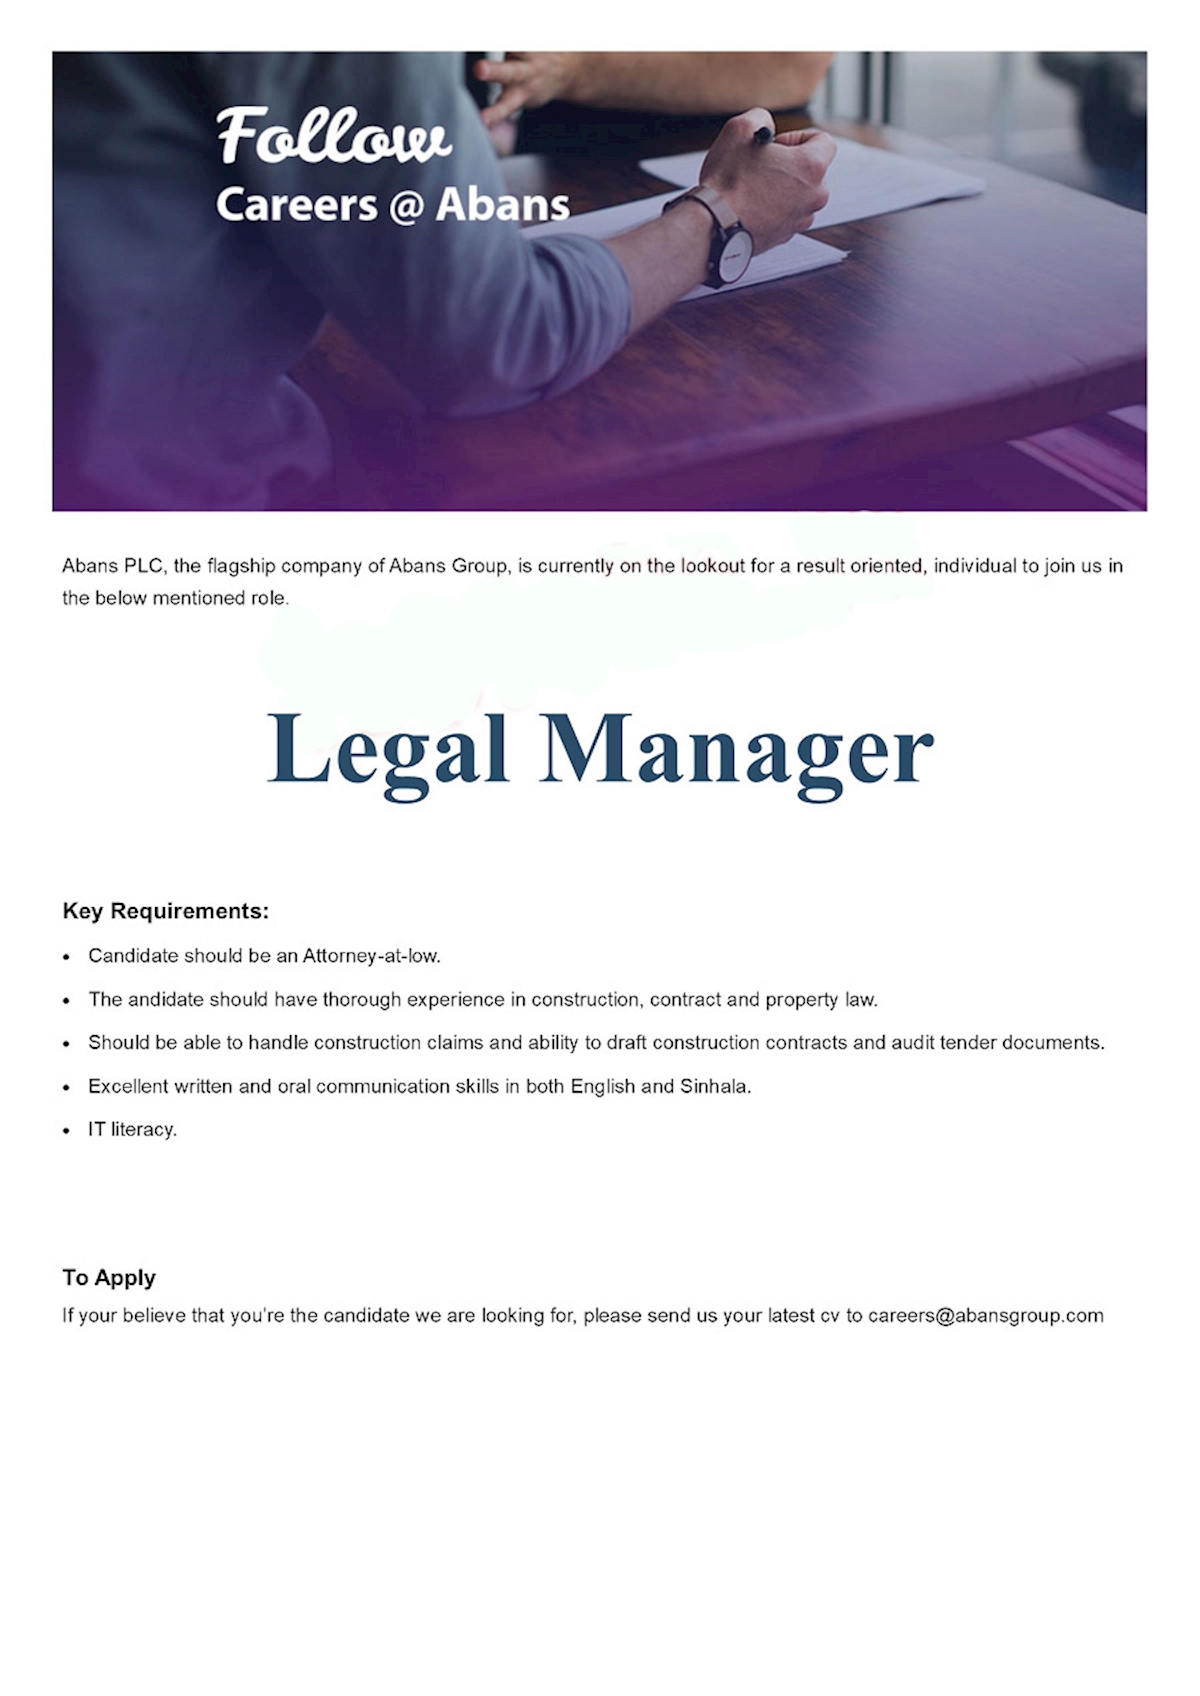 Legal Manager